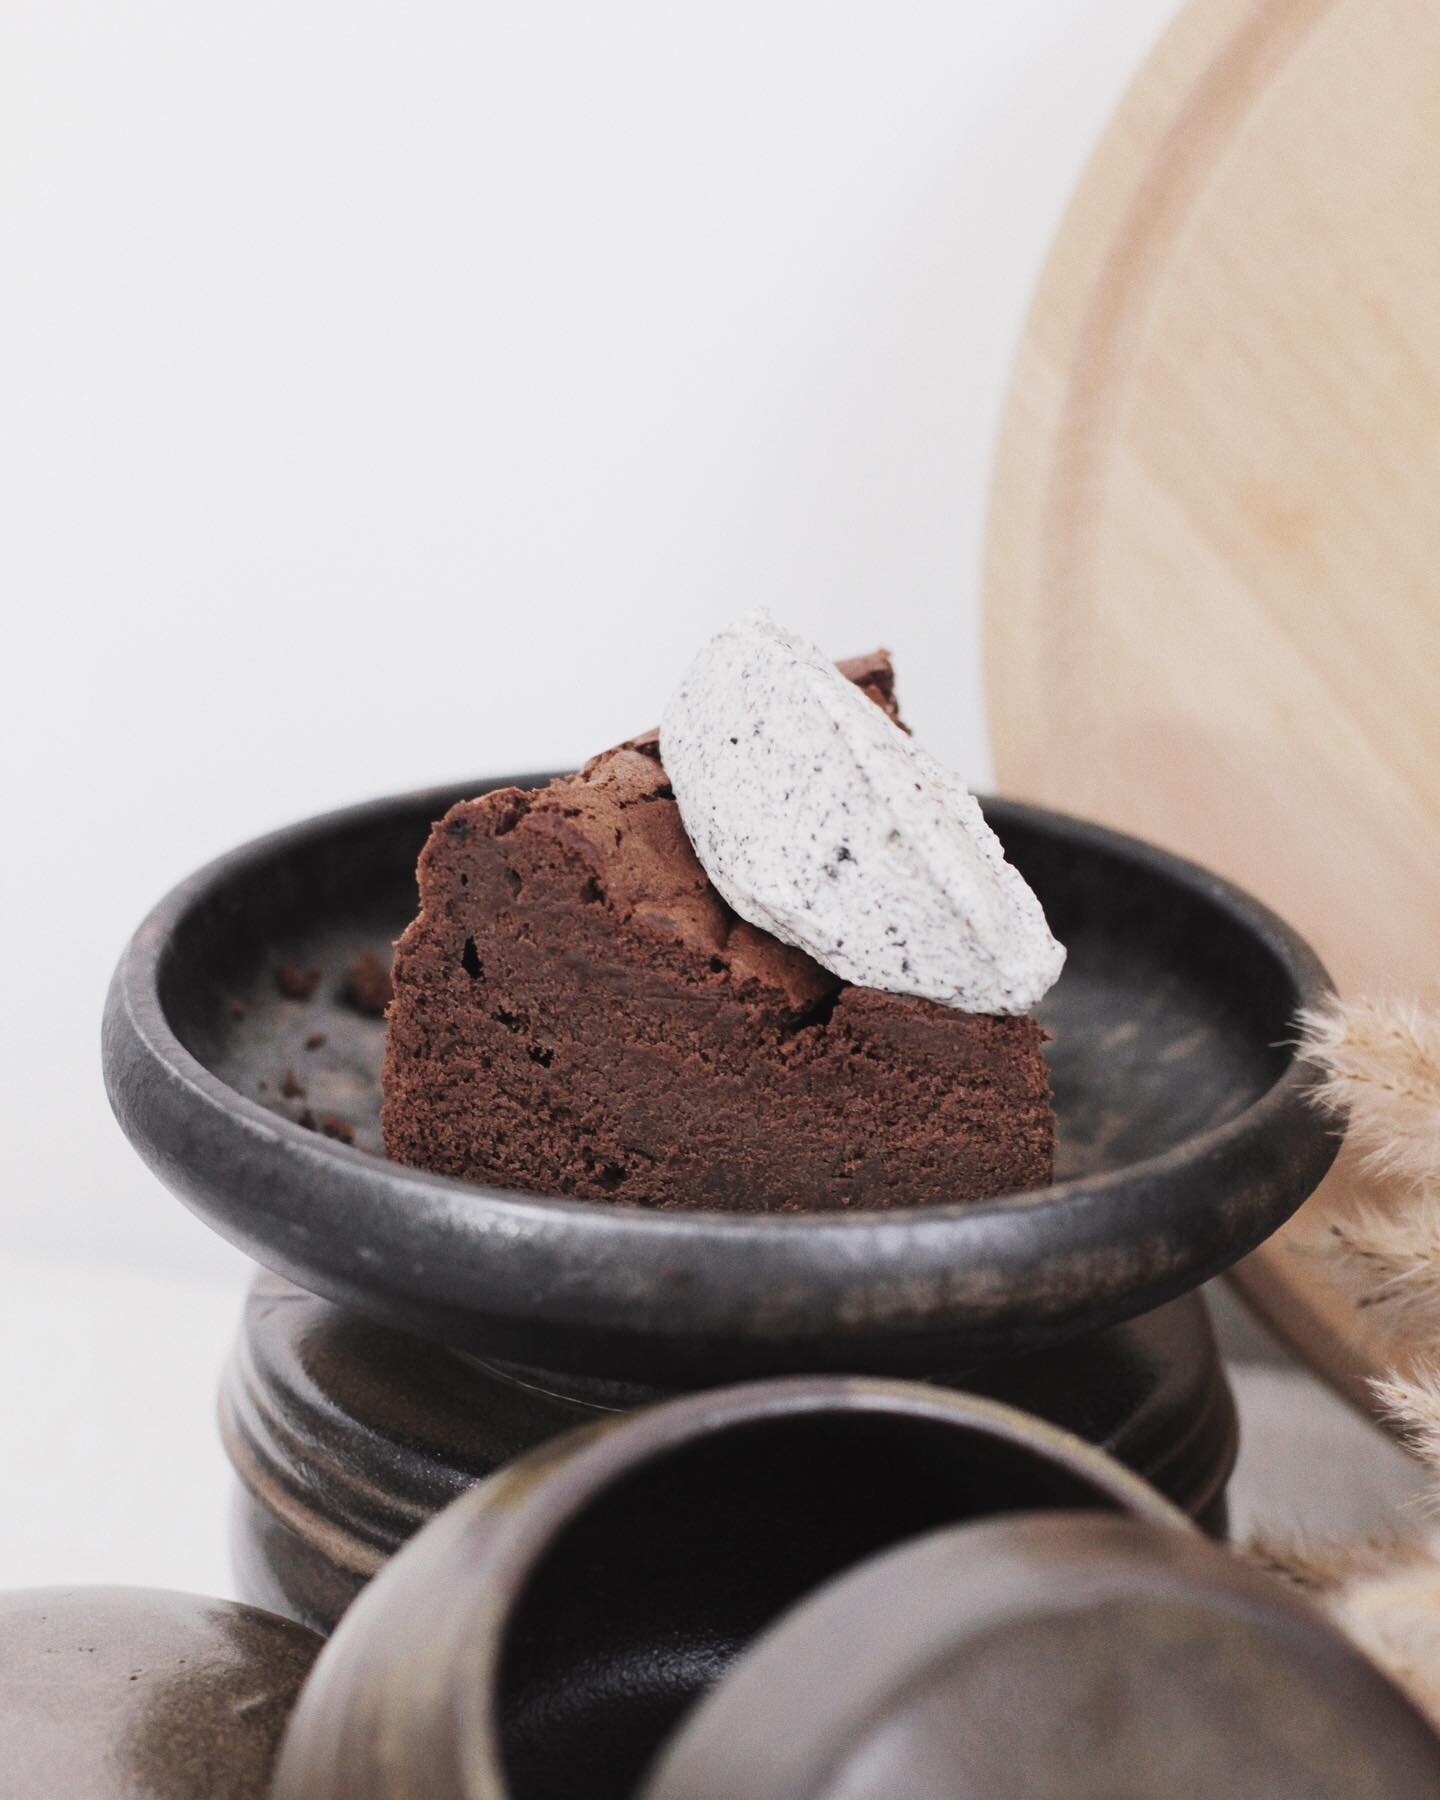 Our flourless dark chocolate cake is luscious, soft, and eats like a ganache. Topped with black sesame doenjang creme chantilly for a touch of umami earthiness.